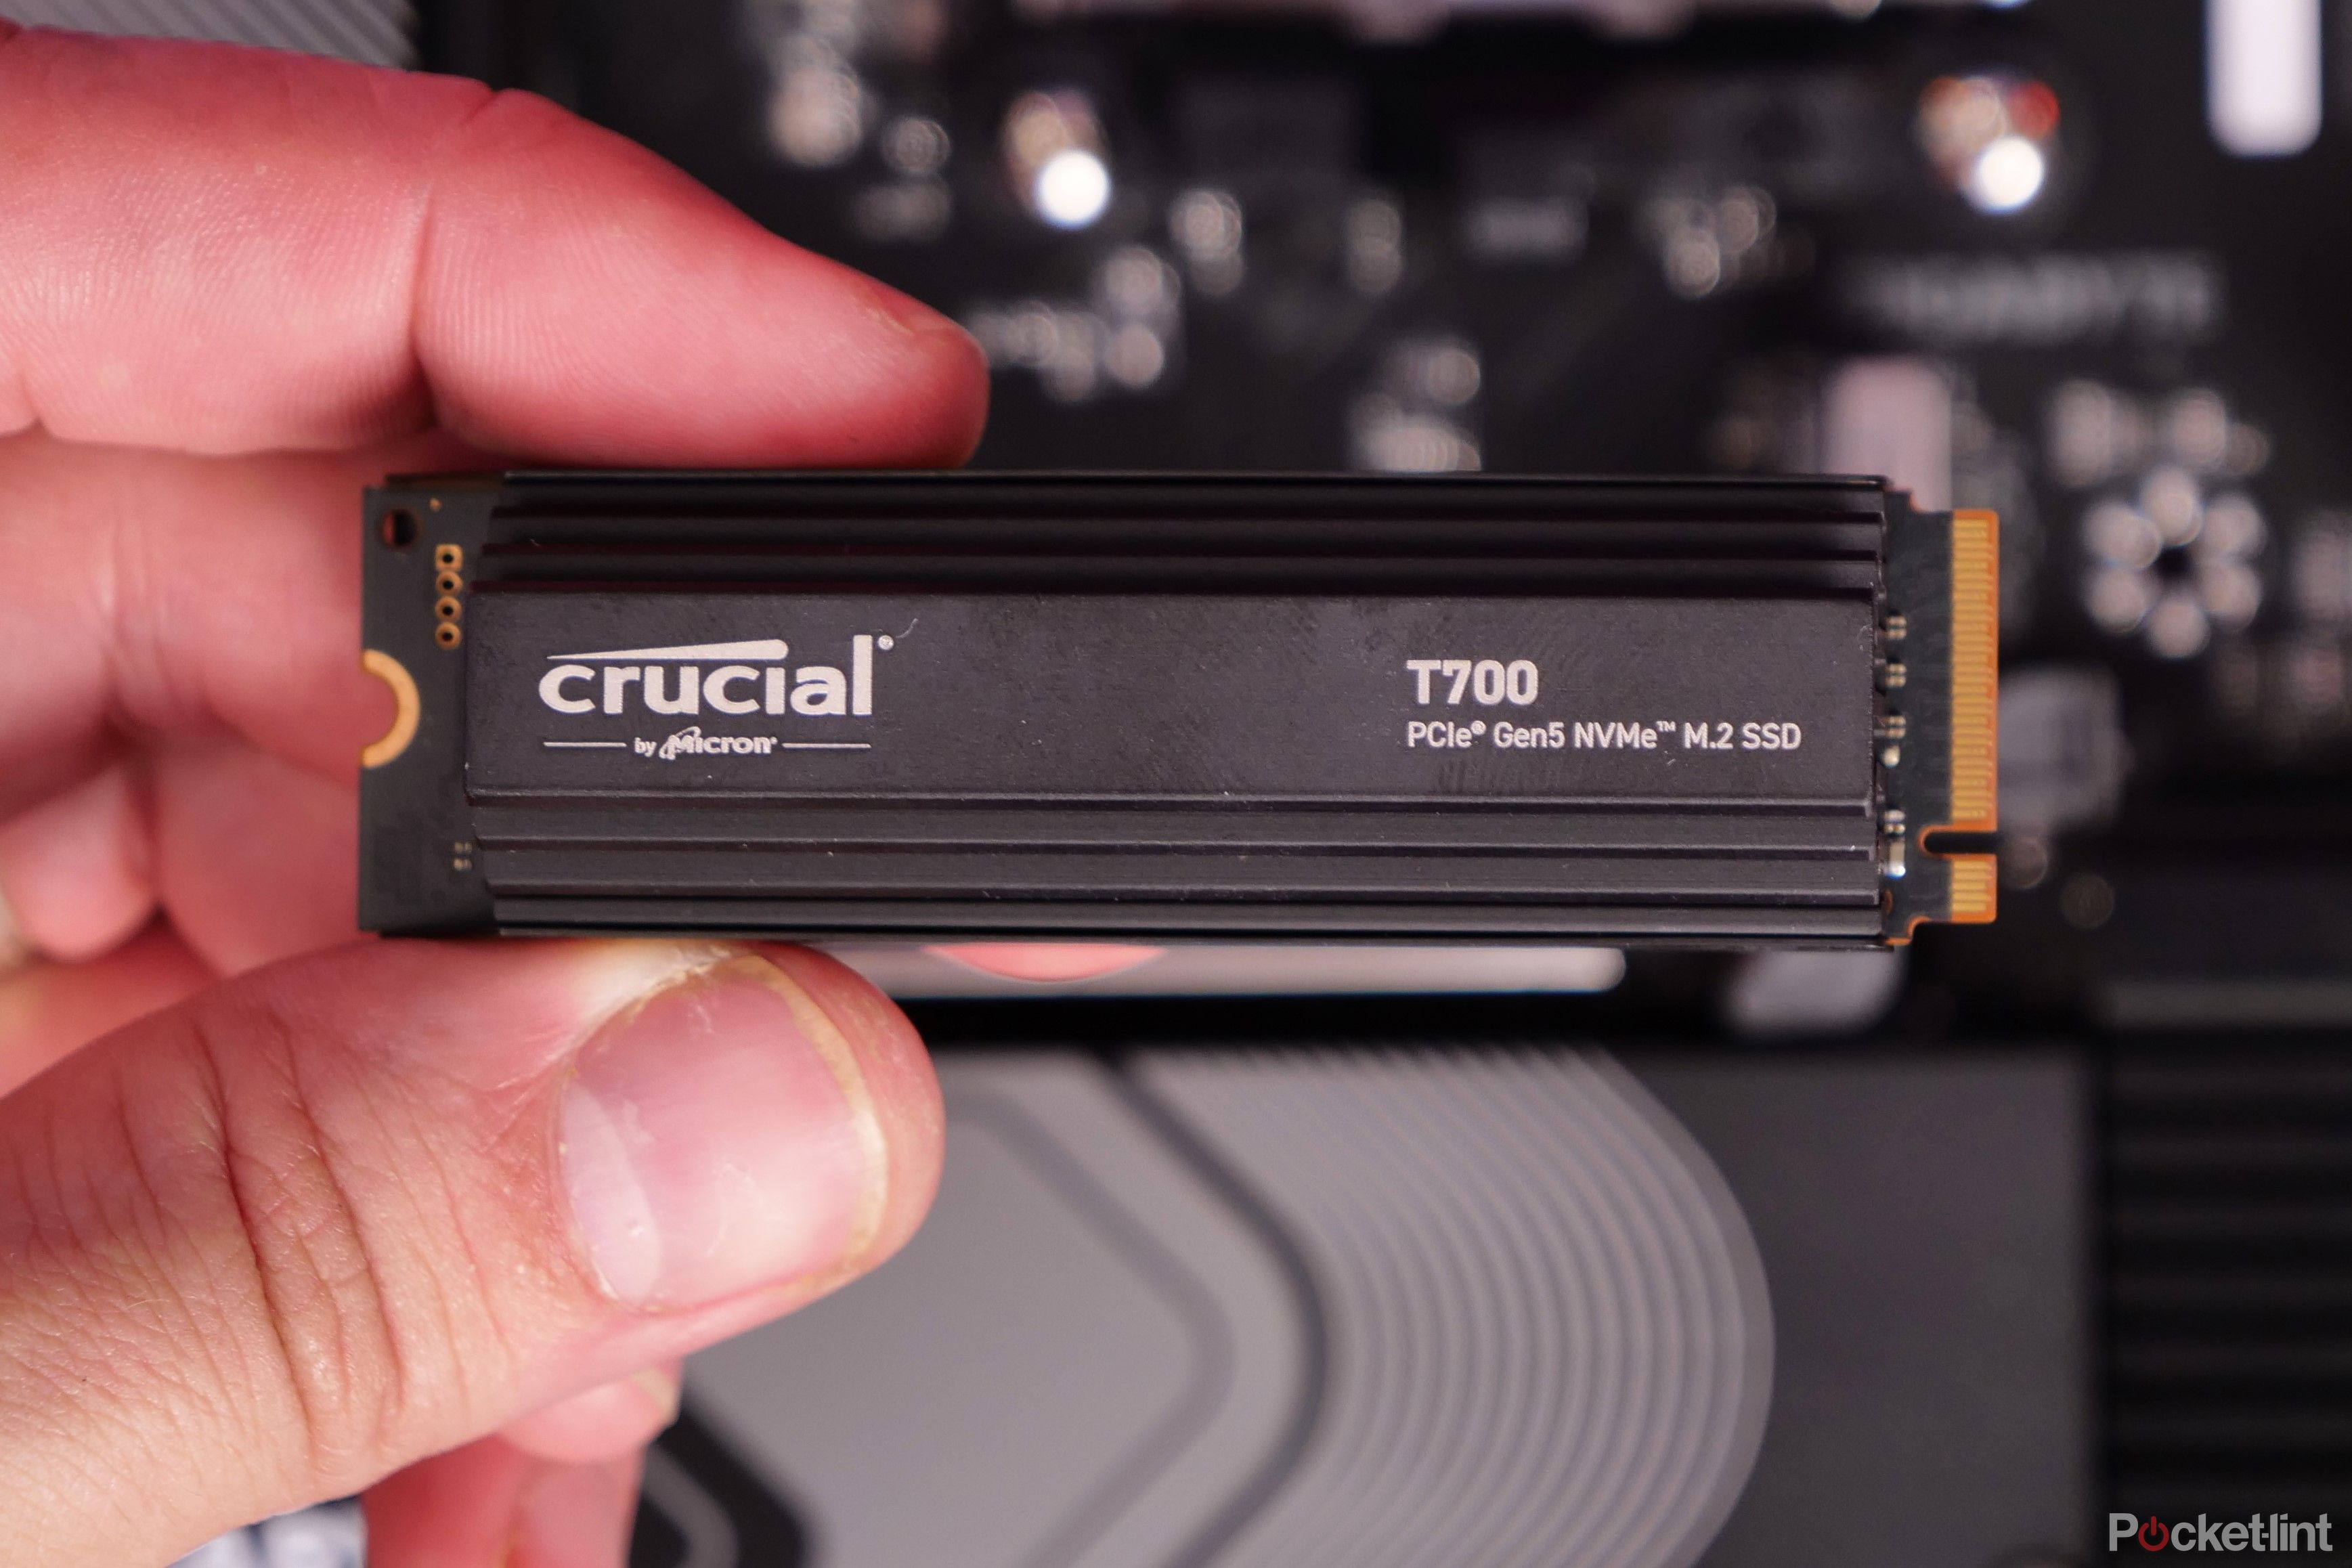 Get 4TB of NVMe SSD storage from Crucial for 35% off